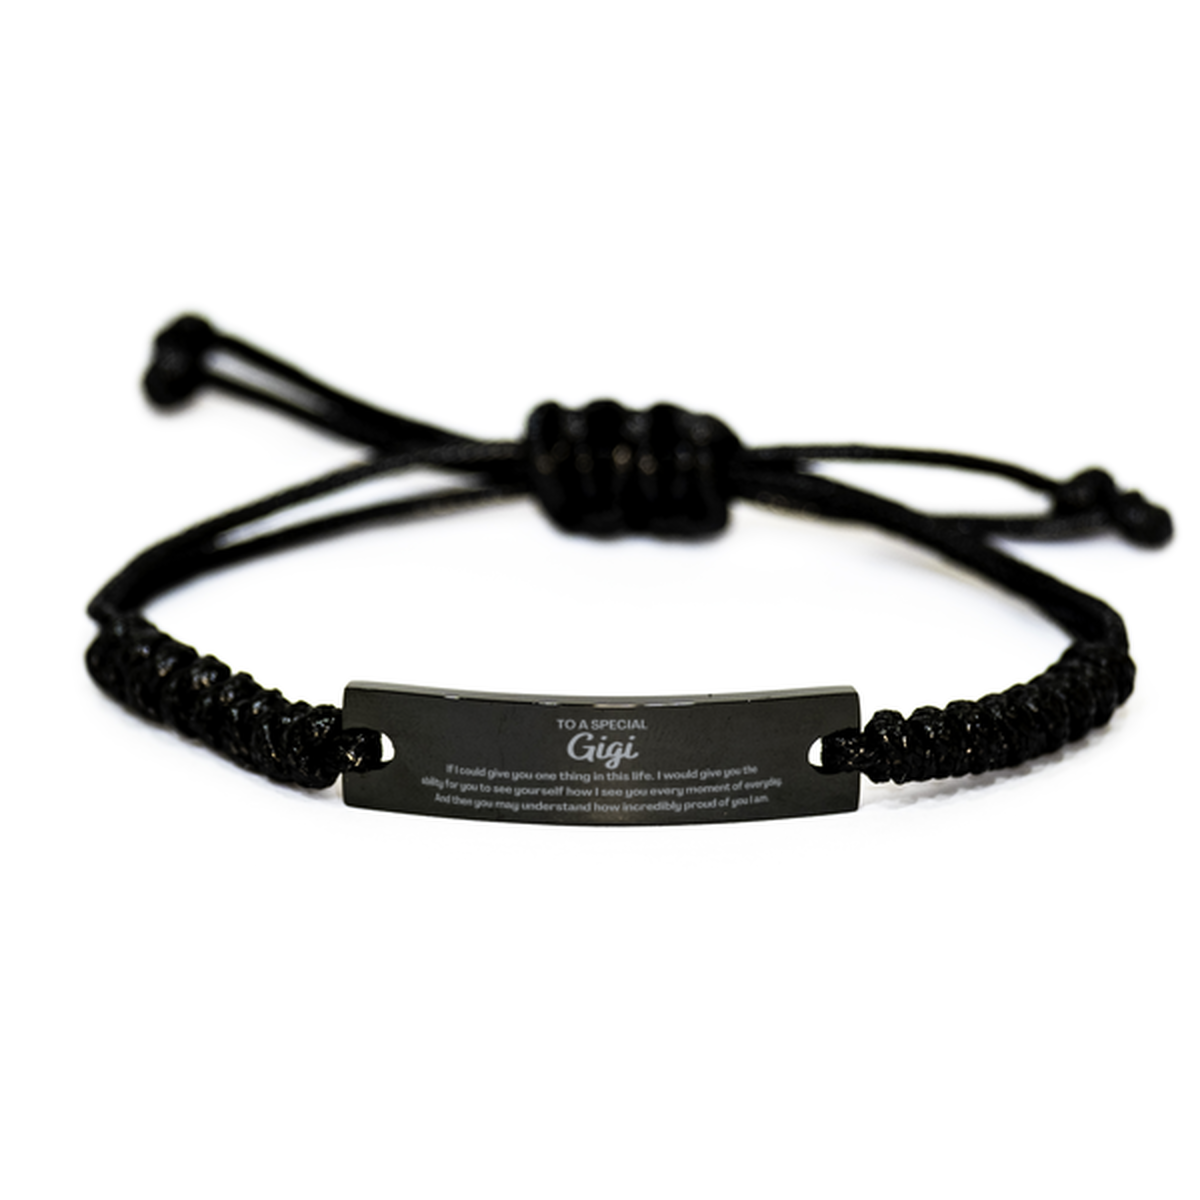 To My Gigi Black Rope Bracelet, Gifts For Gigi Engraved, Inspirational Gifts for Christmas Birthday, Epic Gifts for Gigi To A Special Gigi how incredibly proud of you I am